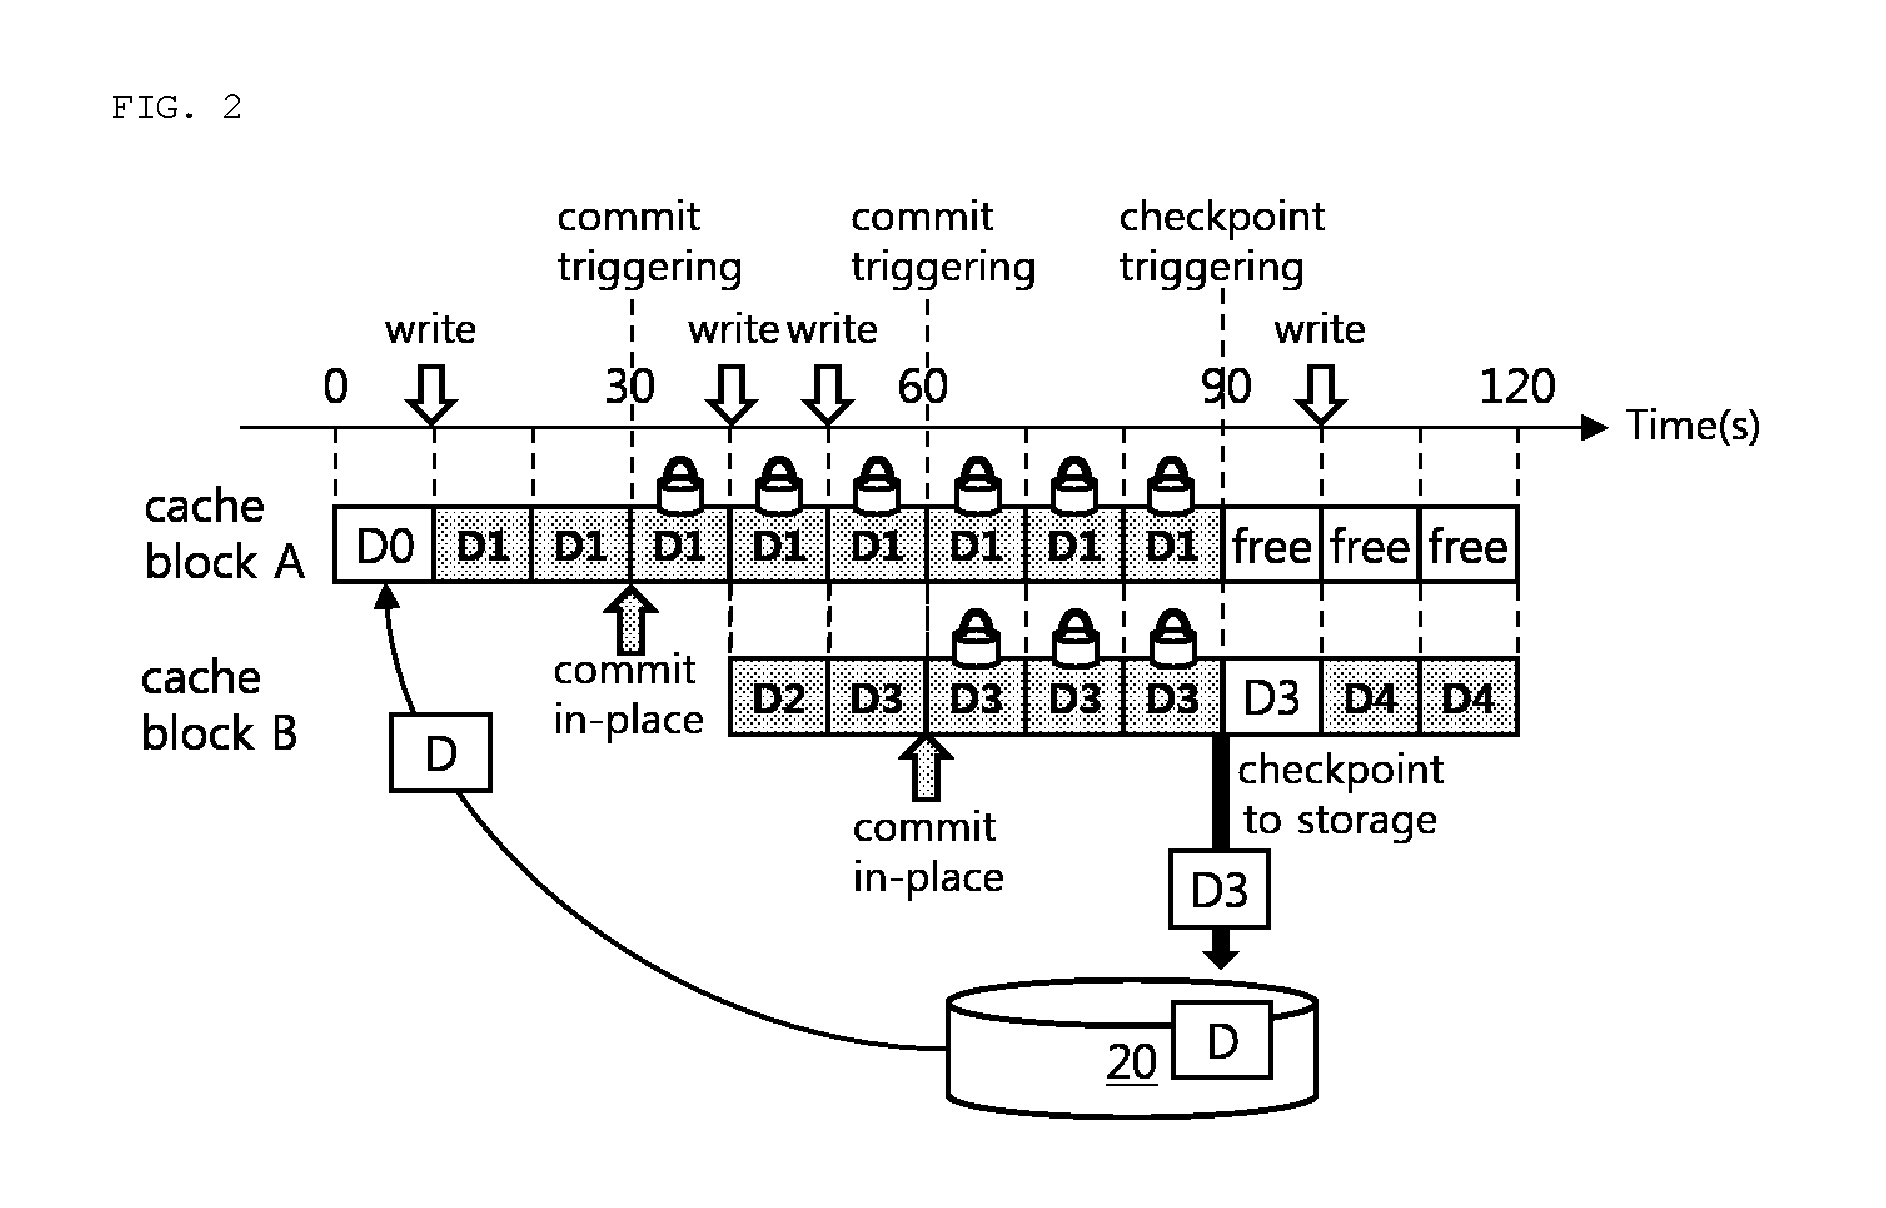 Buffer cache apparatus, journaling file system and journaling method for incorporating journaling features within non-volatile buffer cache